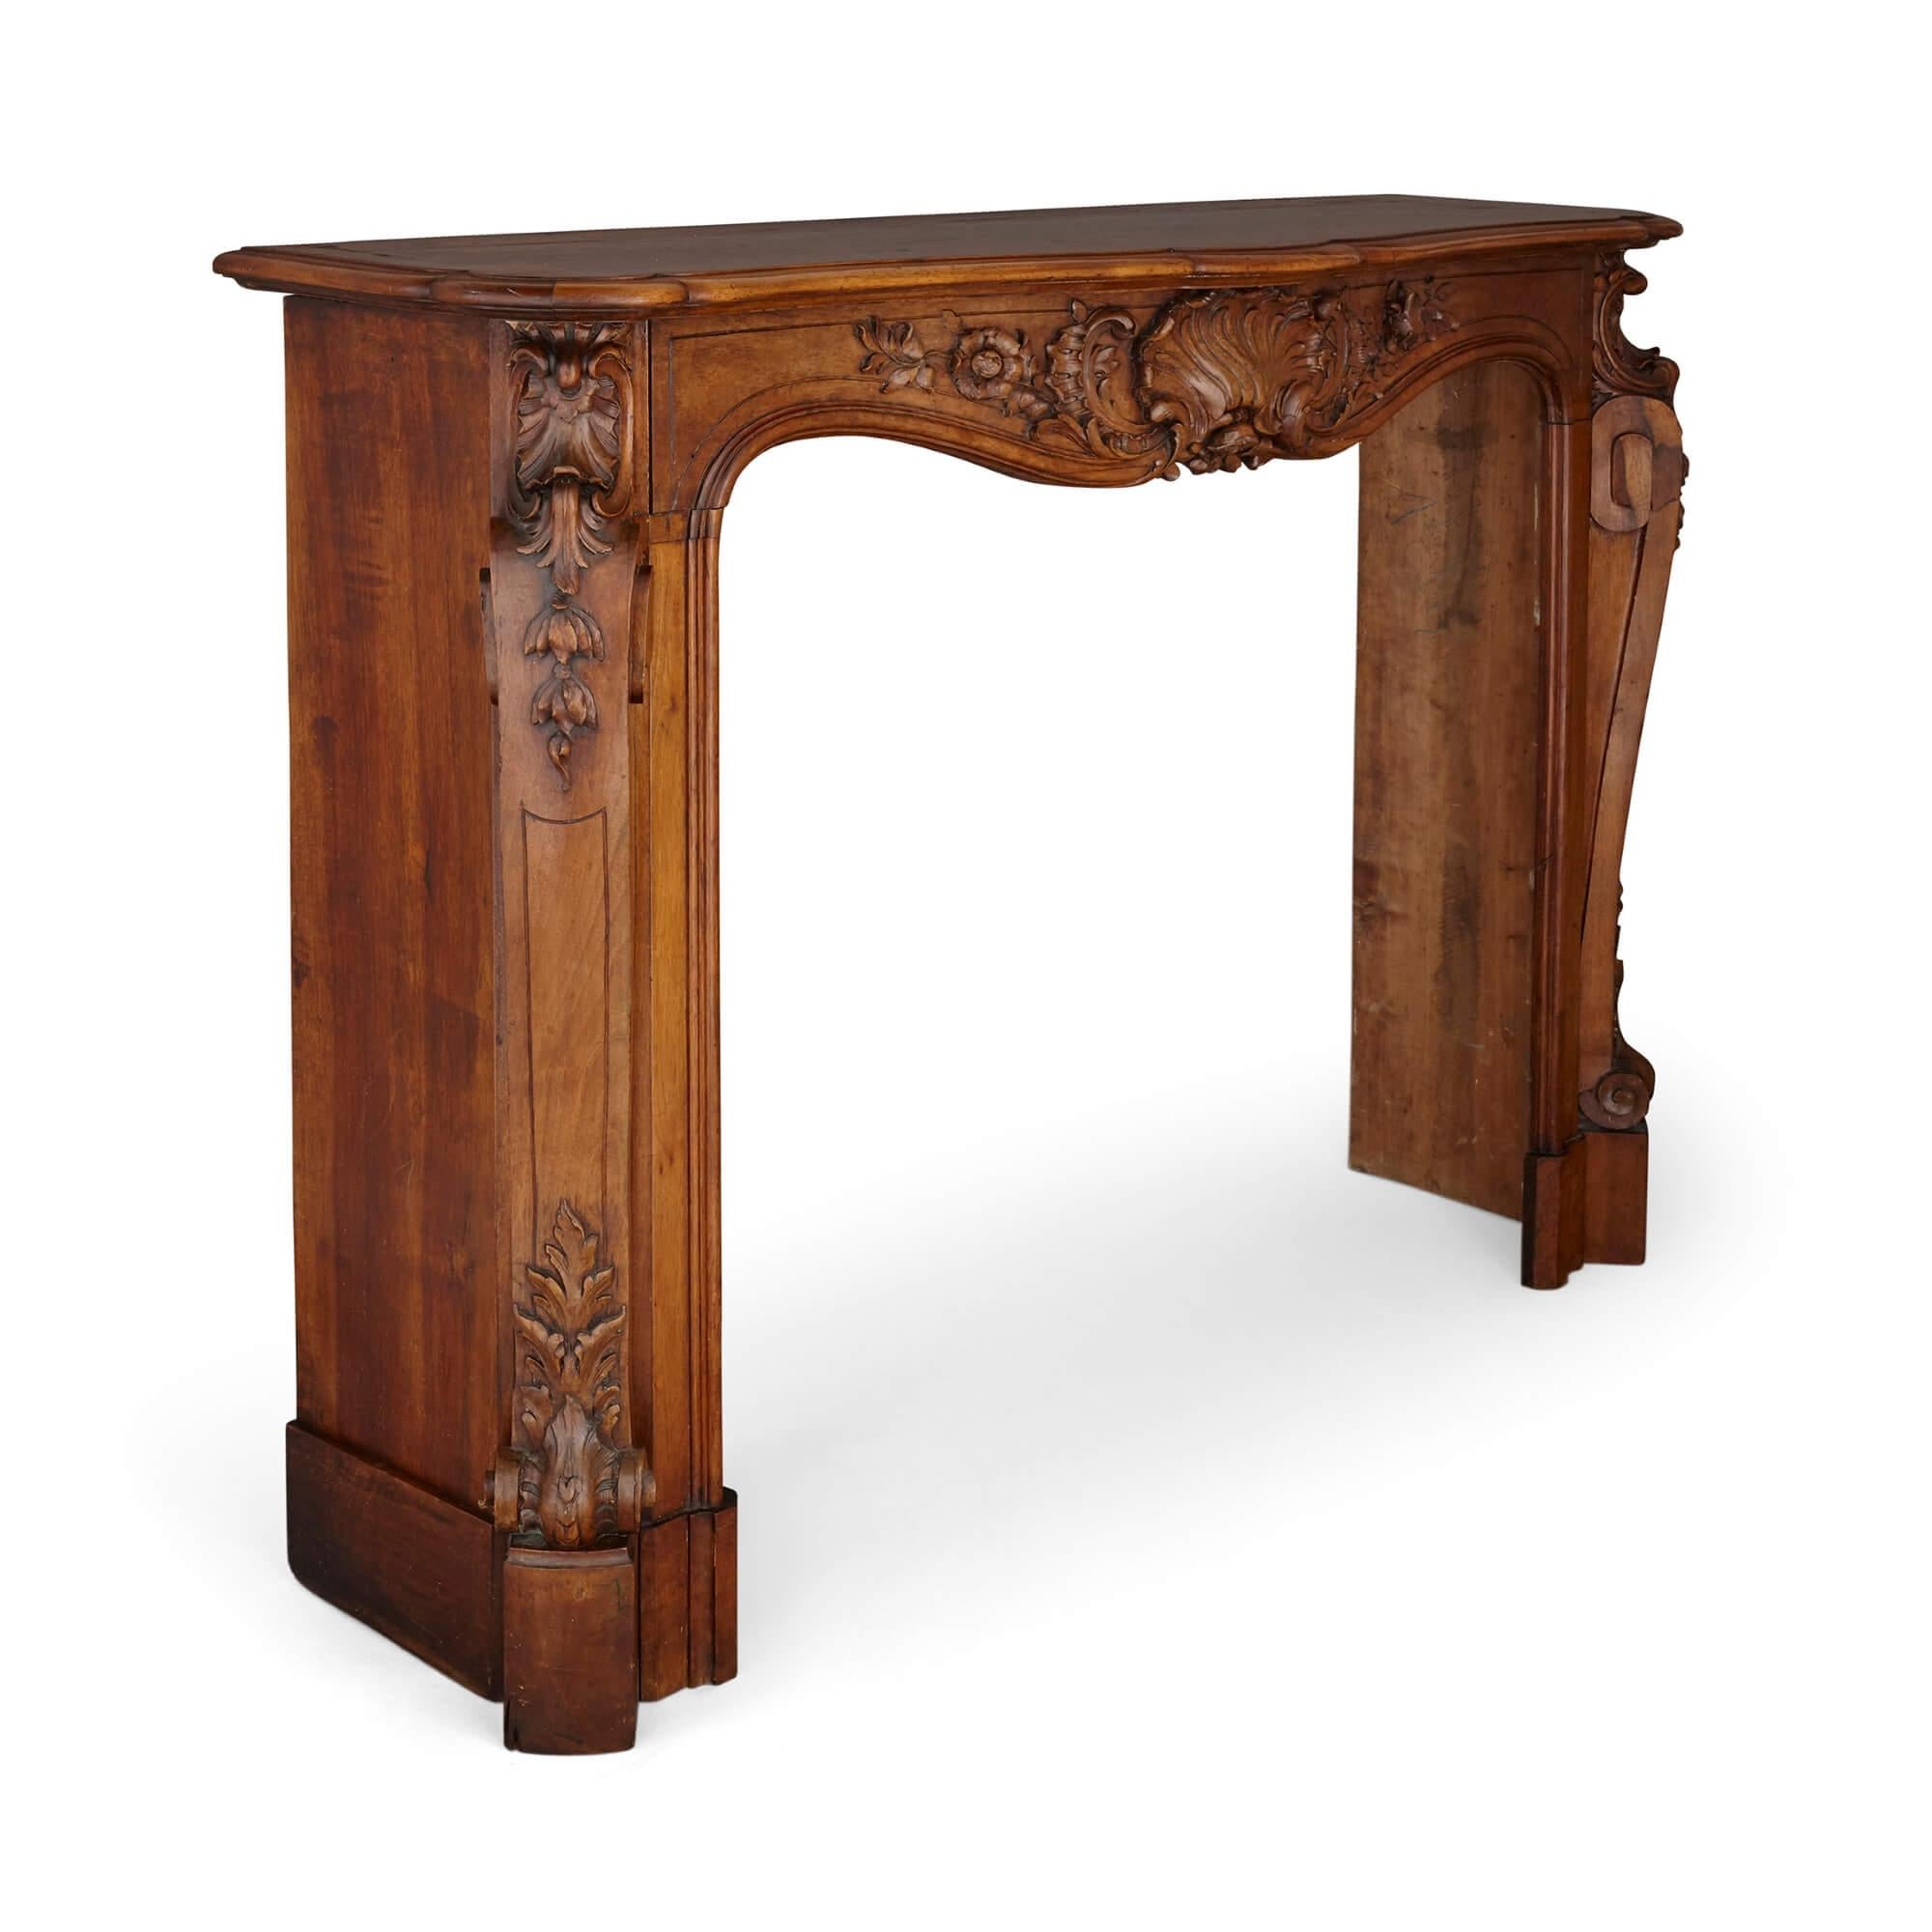 French hand-carved walnut fireplace
French, late 19th century
Measures: Height 121cm, width 160cm, depth 45cm

This beautiful fireplace surround is a wonderful demonstration of wood carving. The fireplace is made from walnut, which has been